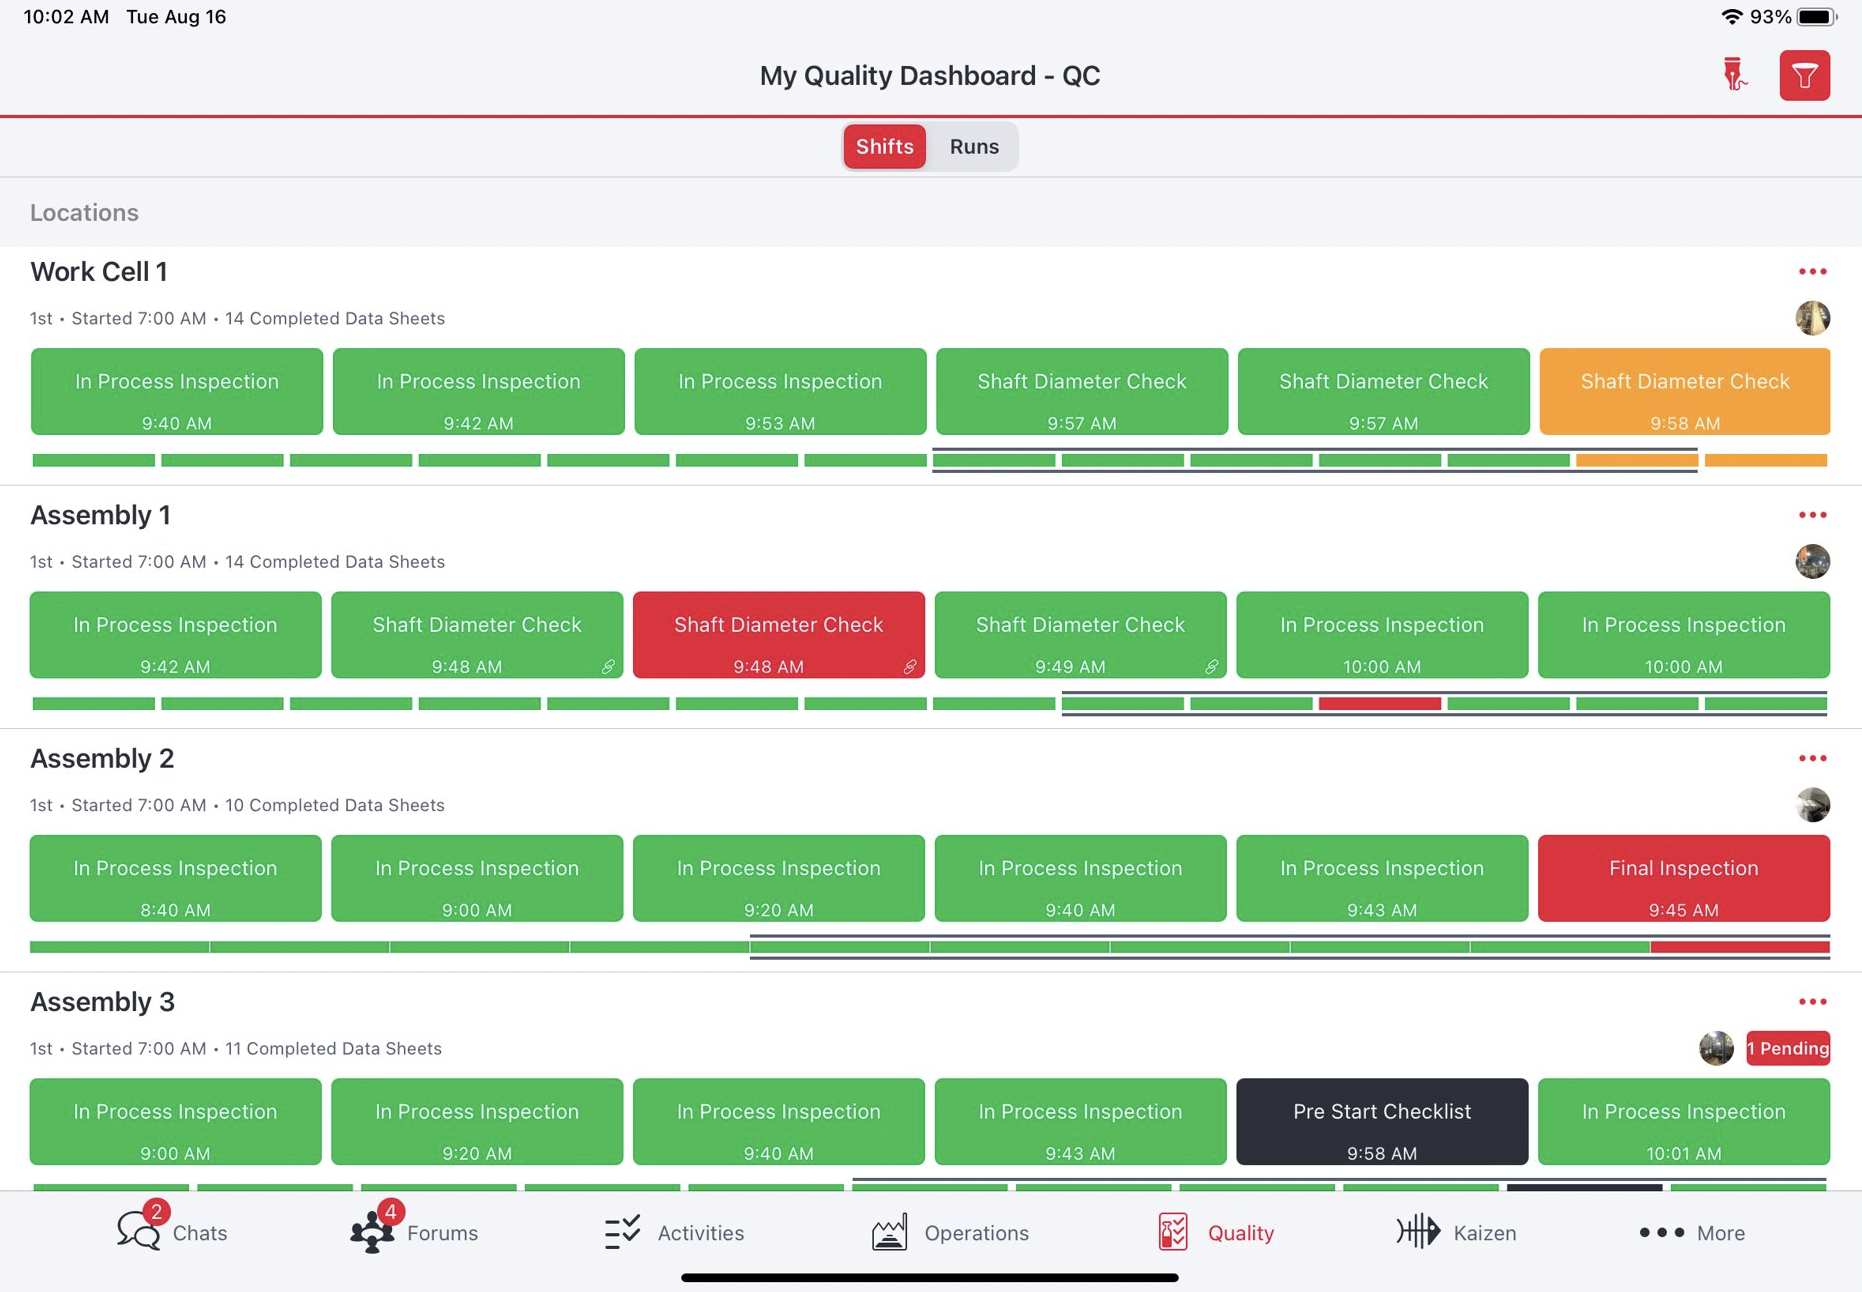 QAD Redzone Software - High level quality inspection by line dashboard showing whether a required check was completed (green), failed (red) or missed (black) with orange indicating an SPC violation. Each can be drilldown into to show the details and notes.